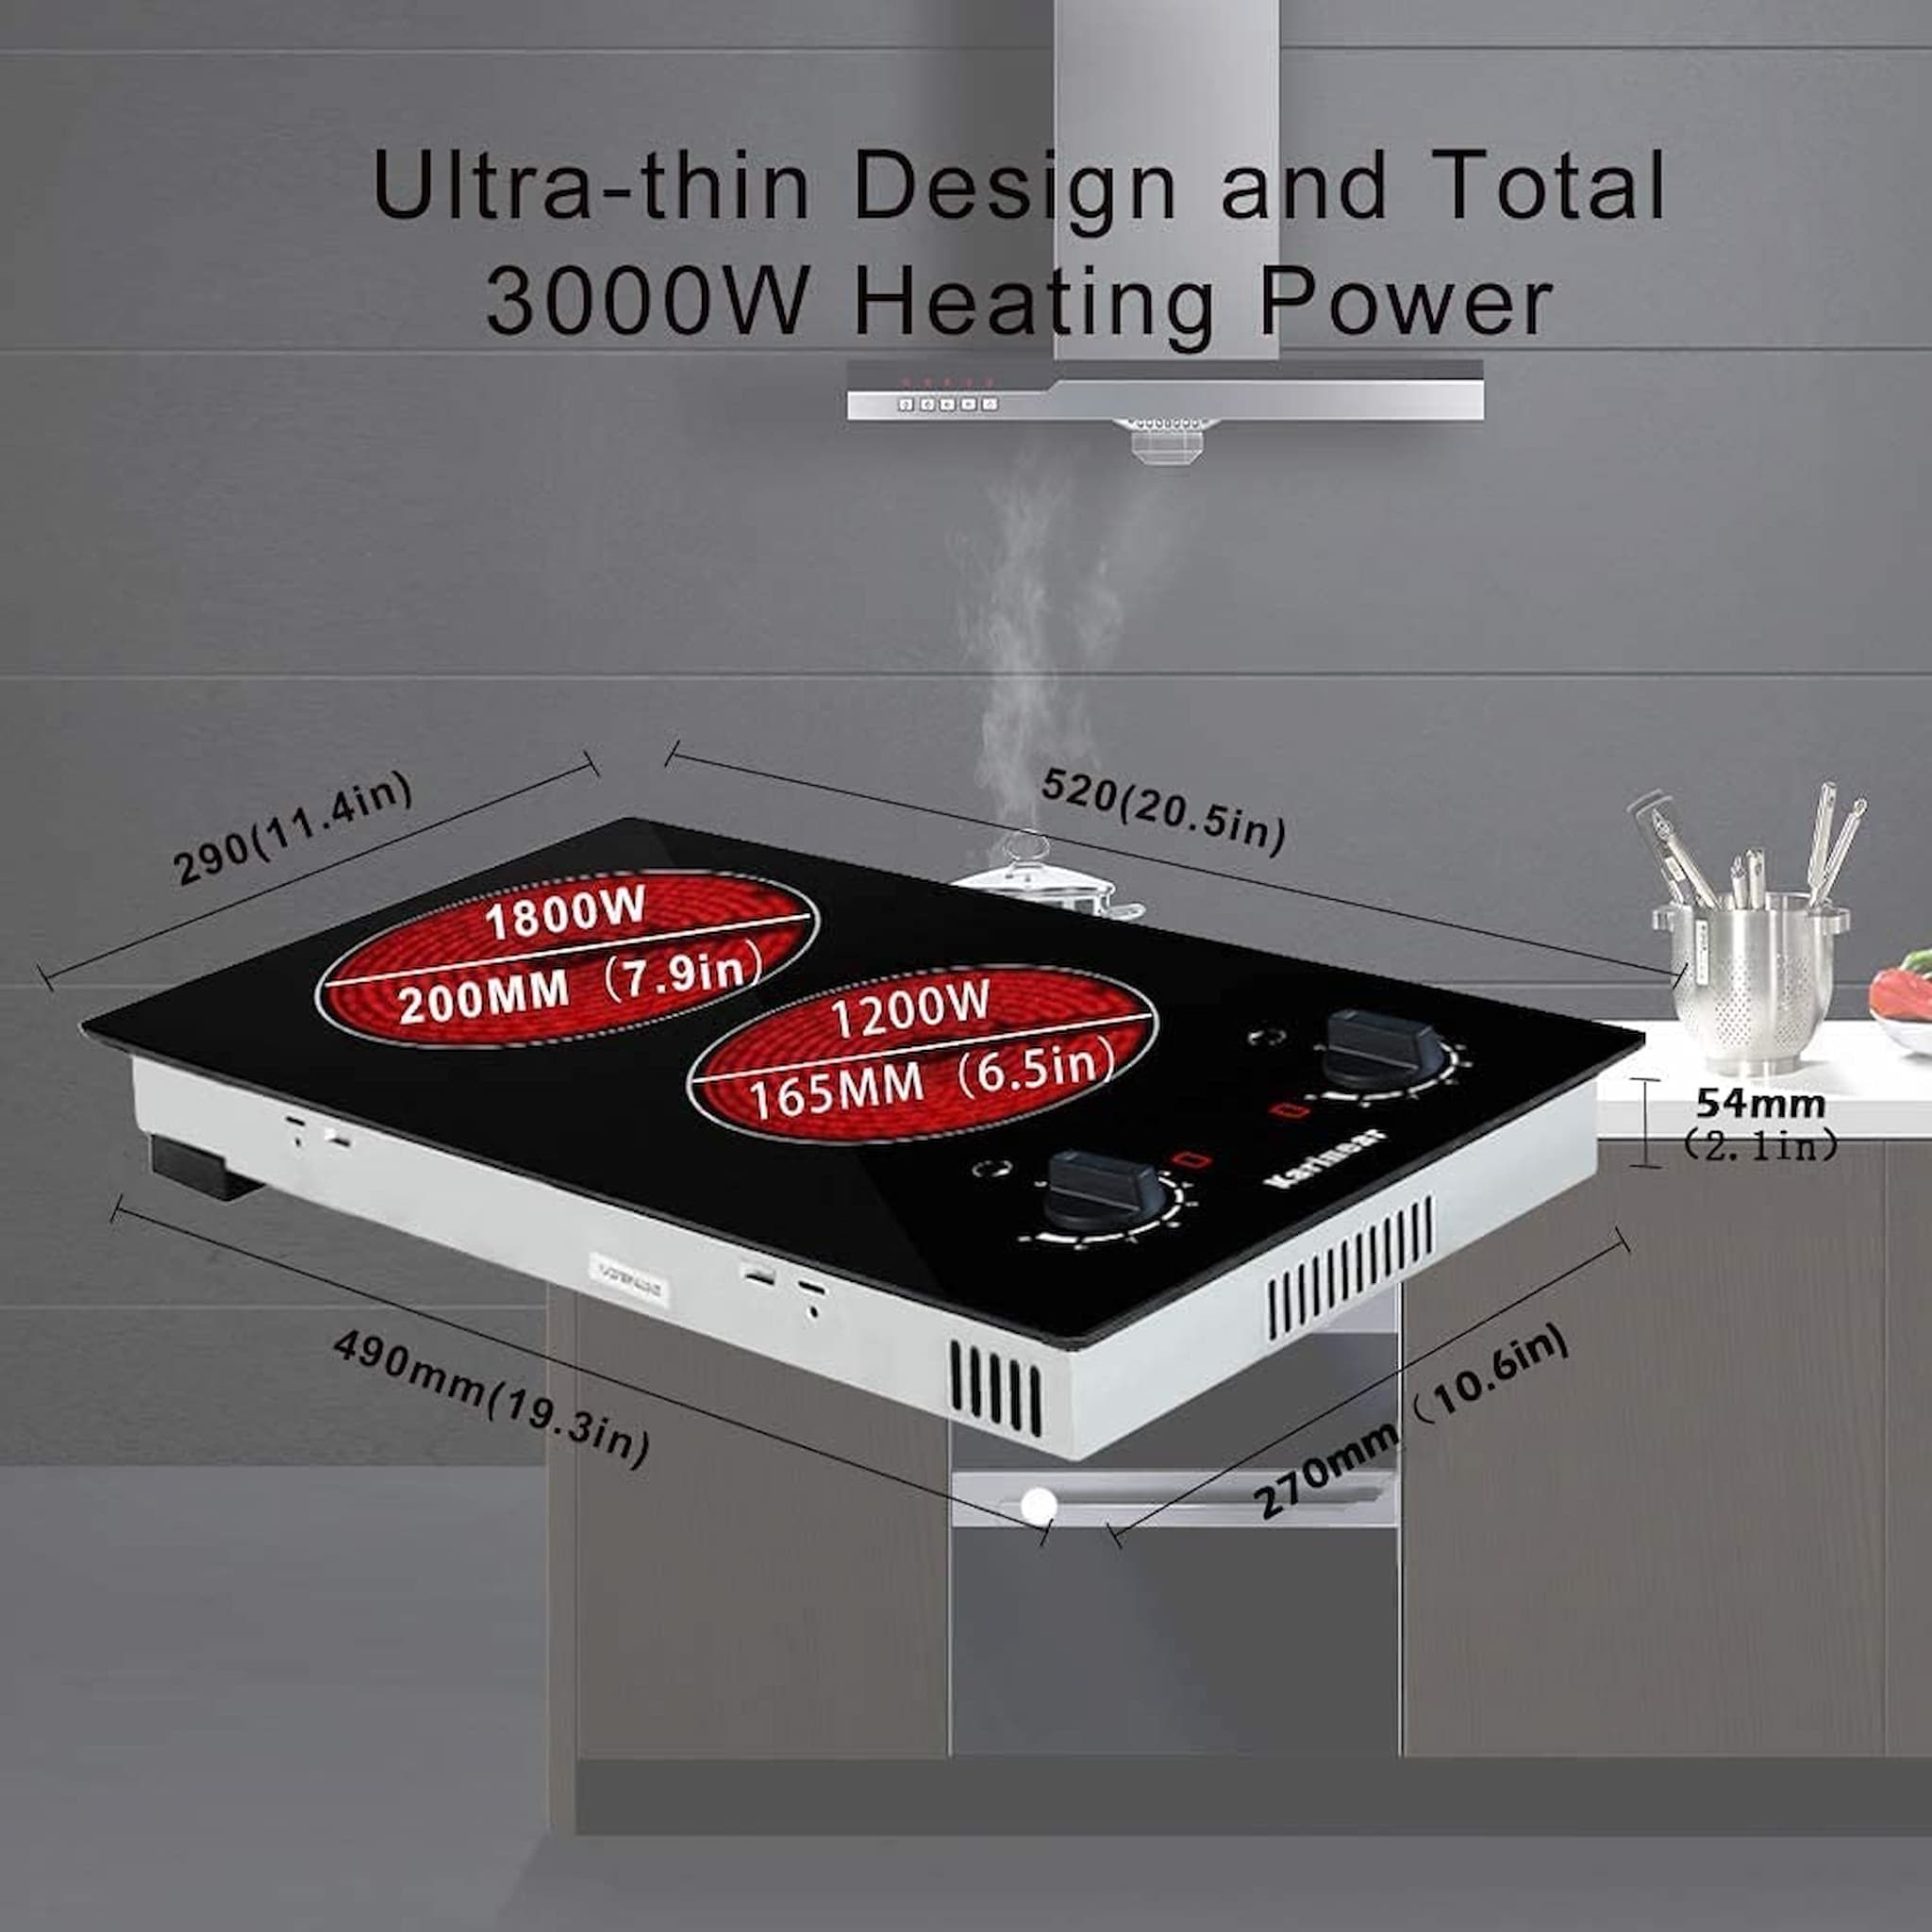 Our electric cooktop 2 burner have 9 power levels to meet your different choice which is convenient for you to choose the right power to cook a variety of different foods, perfect for braise, fry, simmer, steaming, boil, stir-frying, roast. The heating effect of the electric ceramic cooktop is the same as that of the gas stove, and the food made is as delicious as the gas stove.